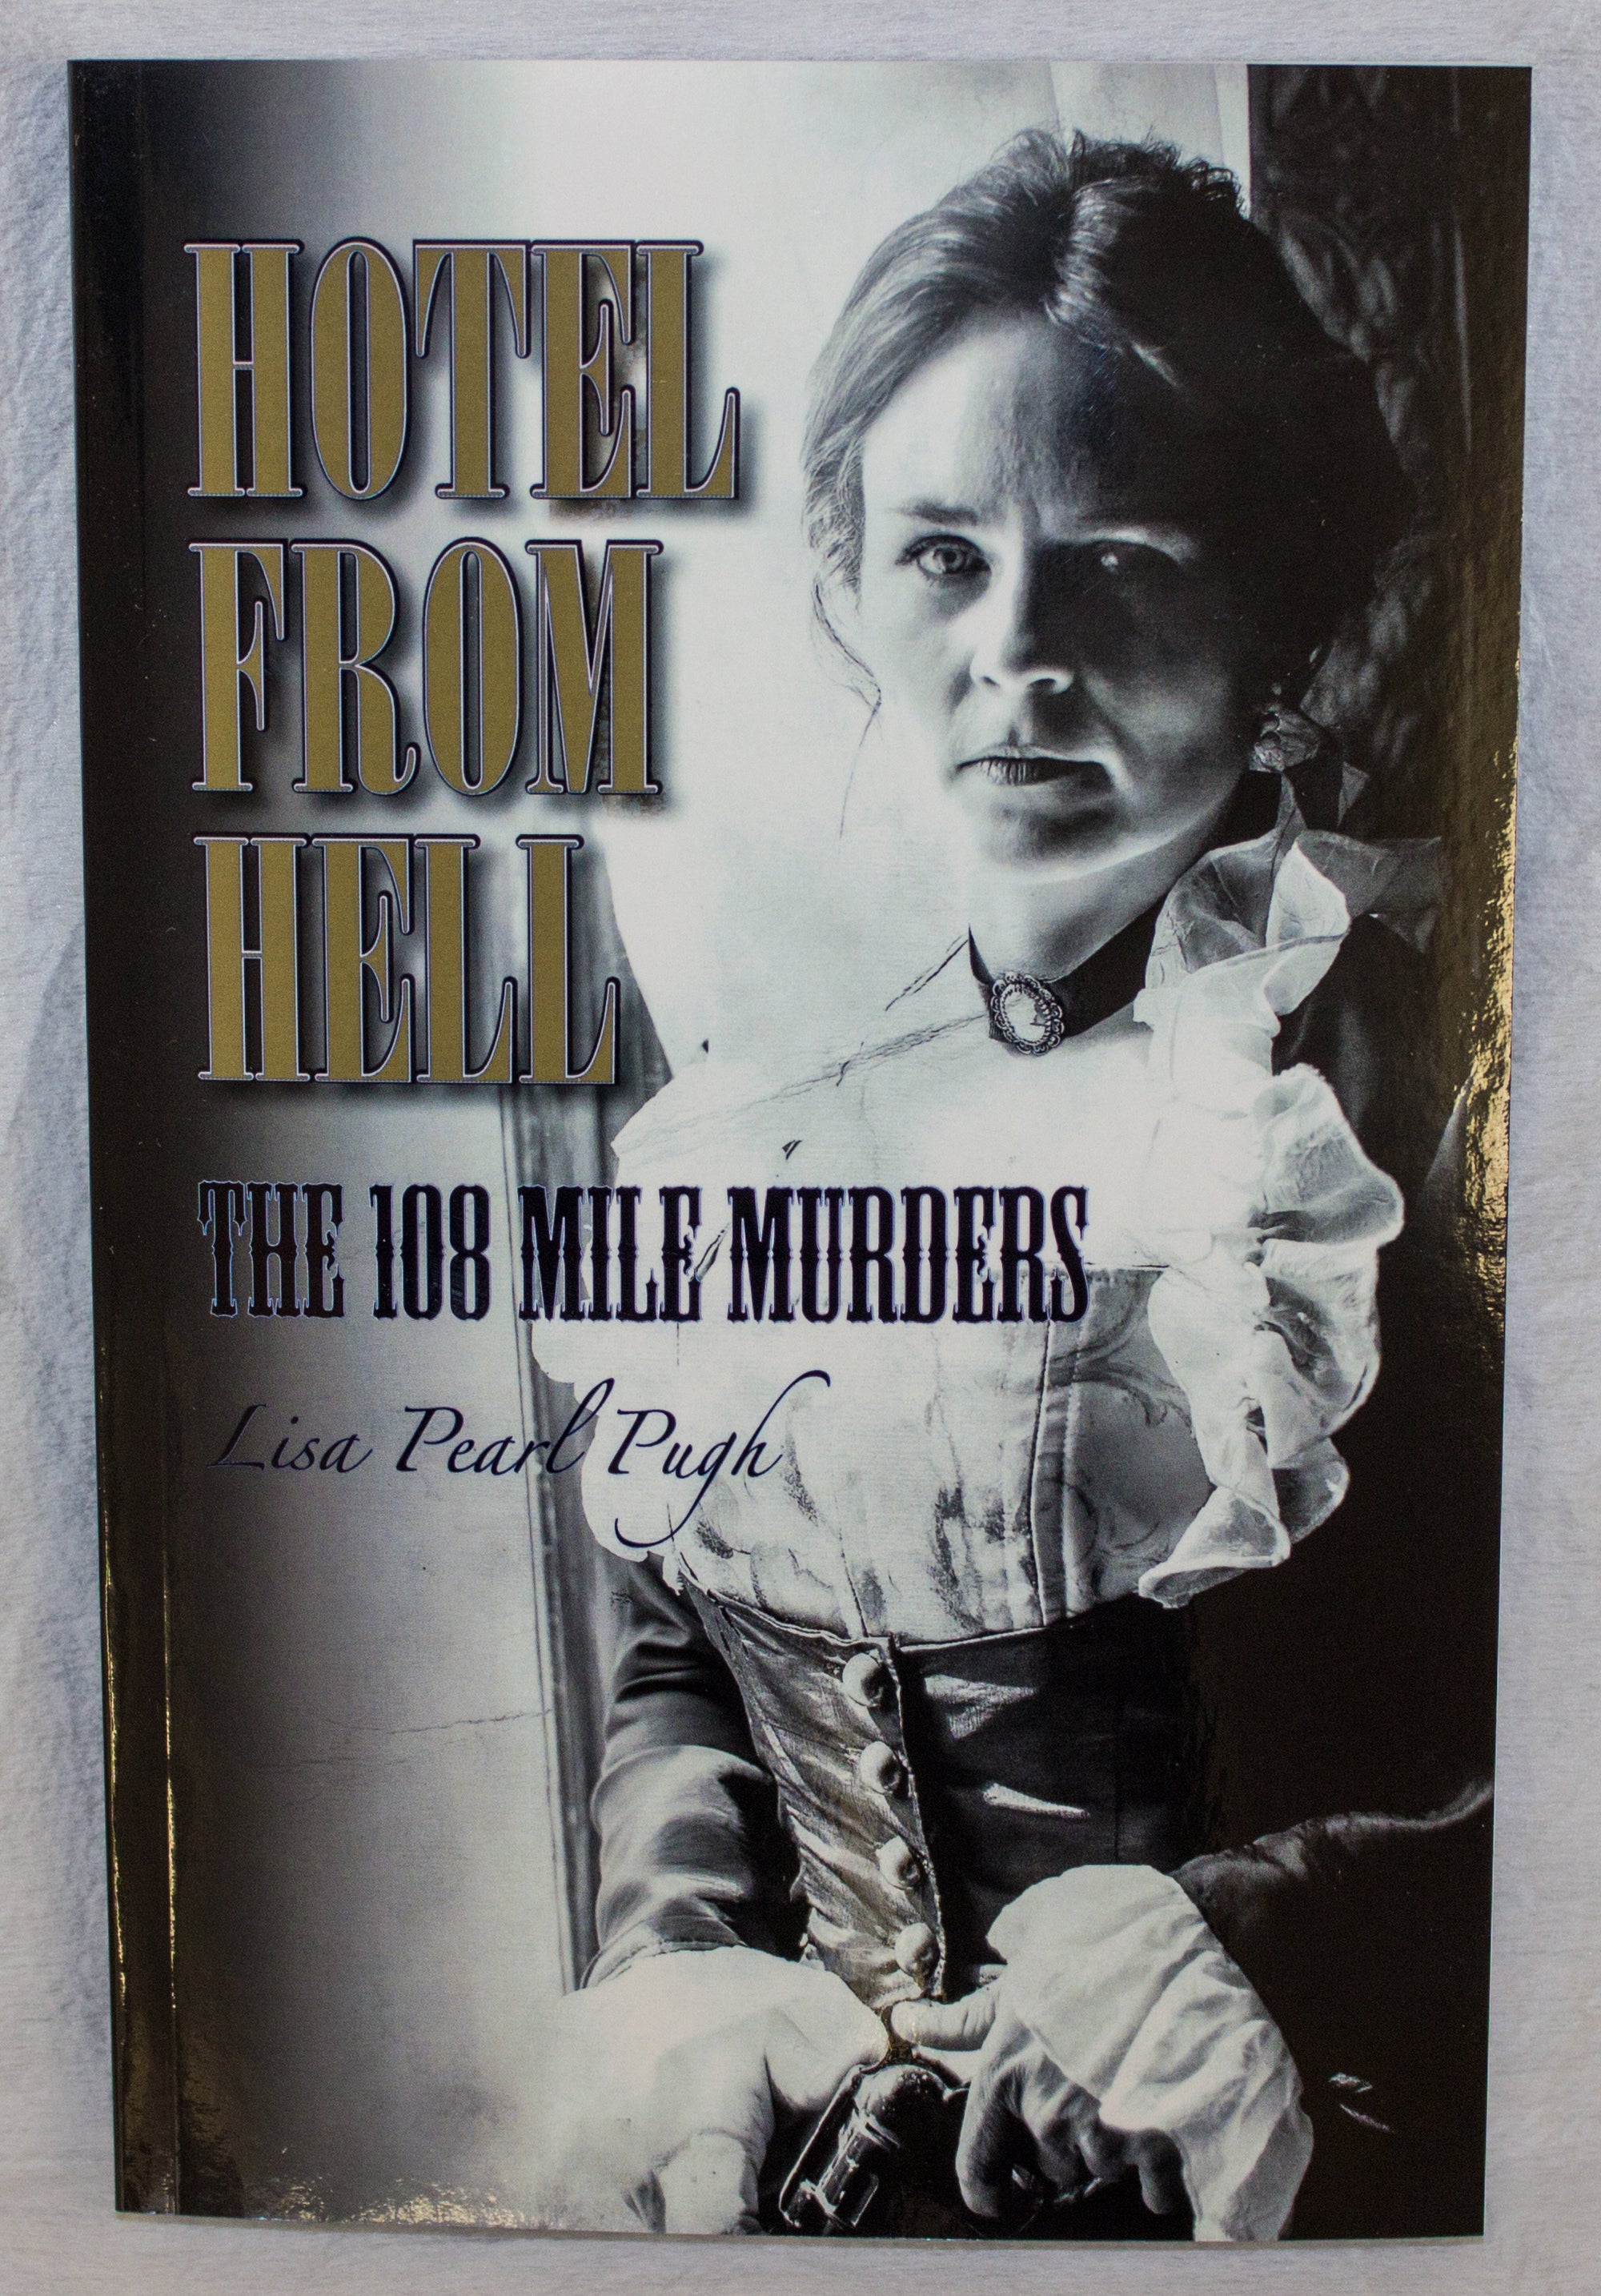 Hotel from Hell: The 108 Mile Murders